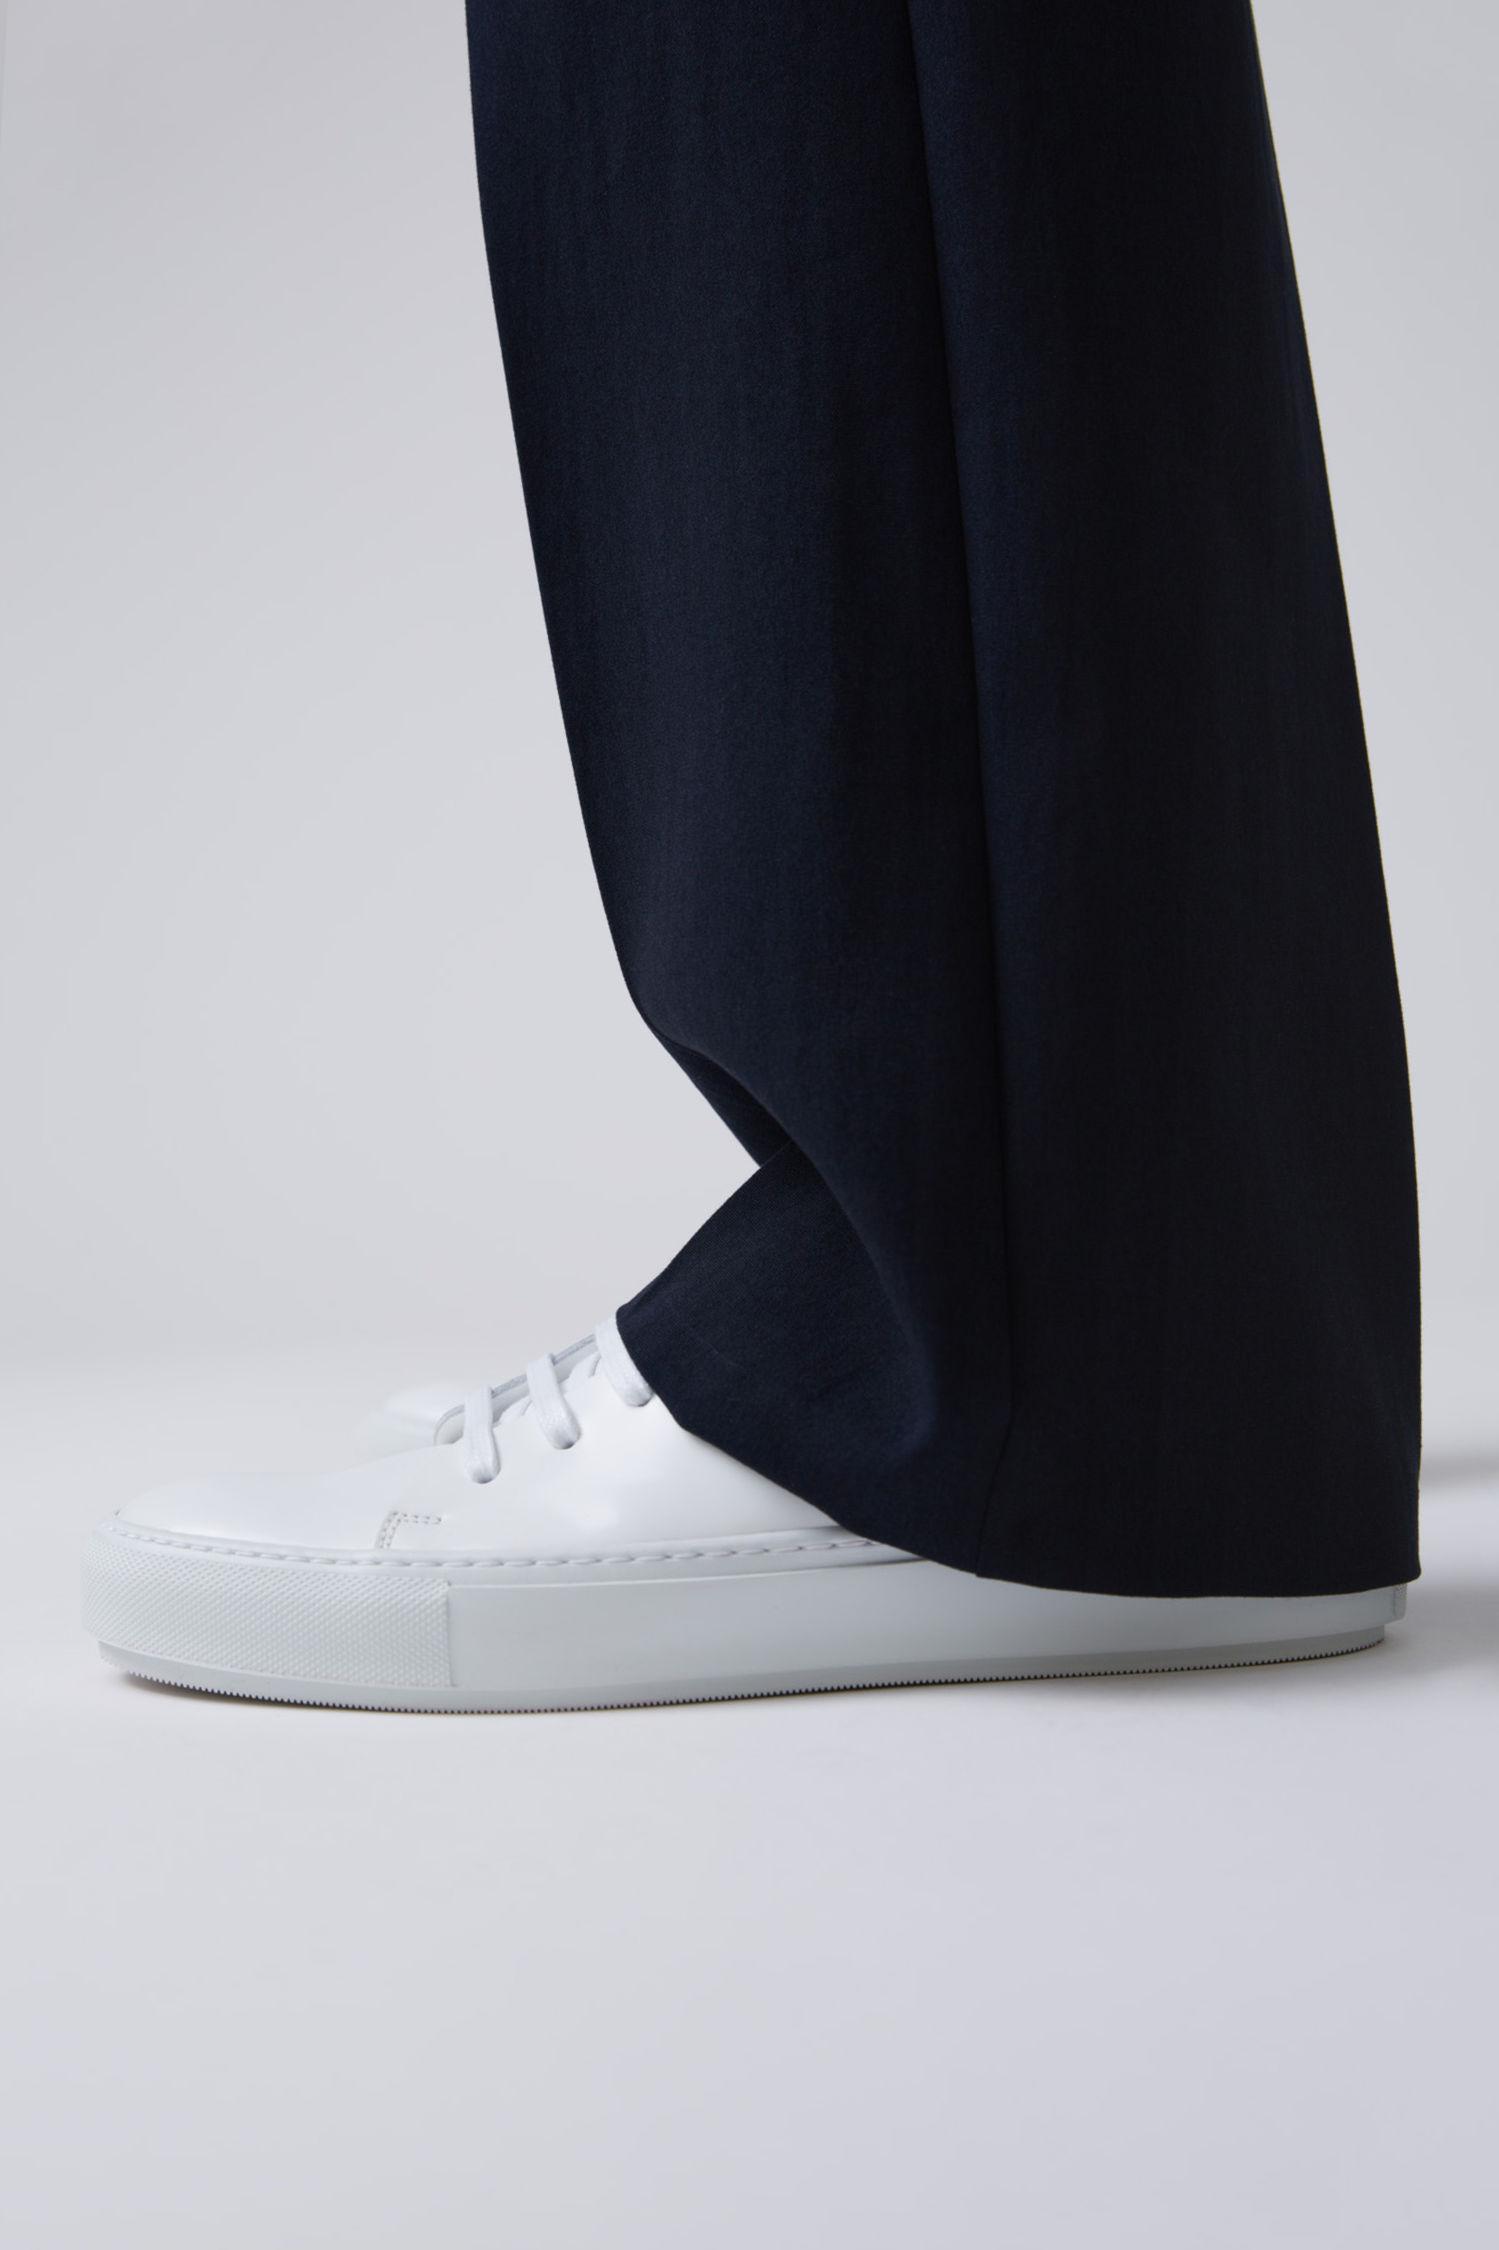 Acne Studios Leather Tennis Shoes white for Men - Lyst